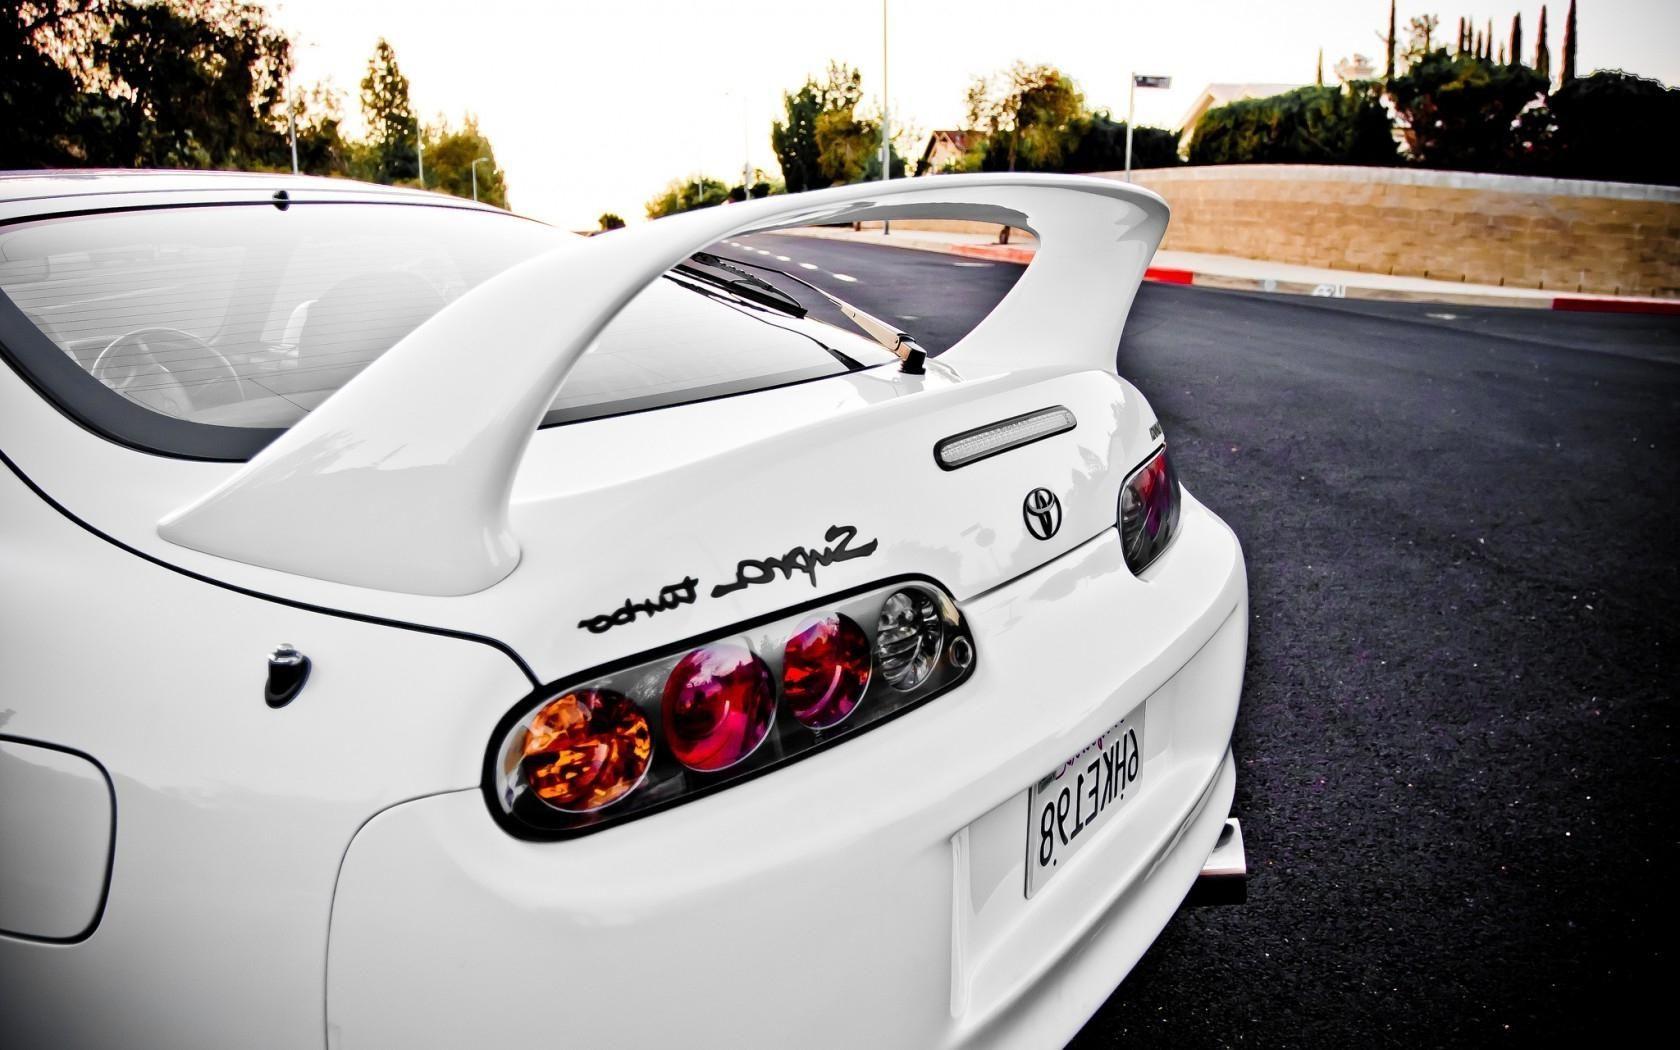 Toyota Supra Wallpaper iPhone, image collections of wallpaper